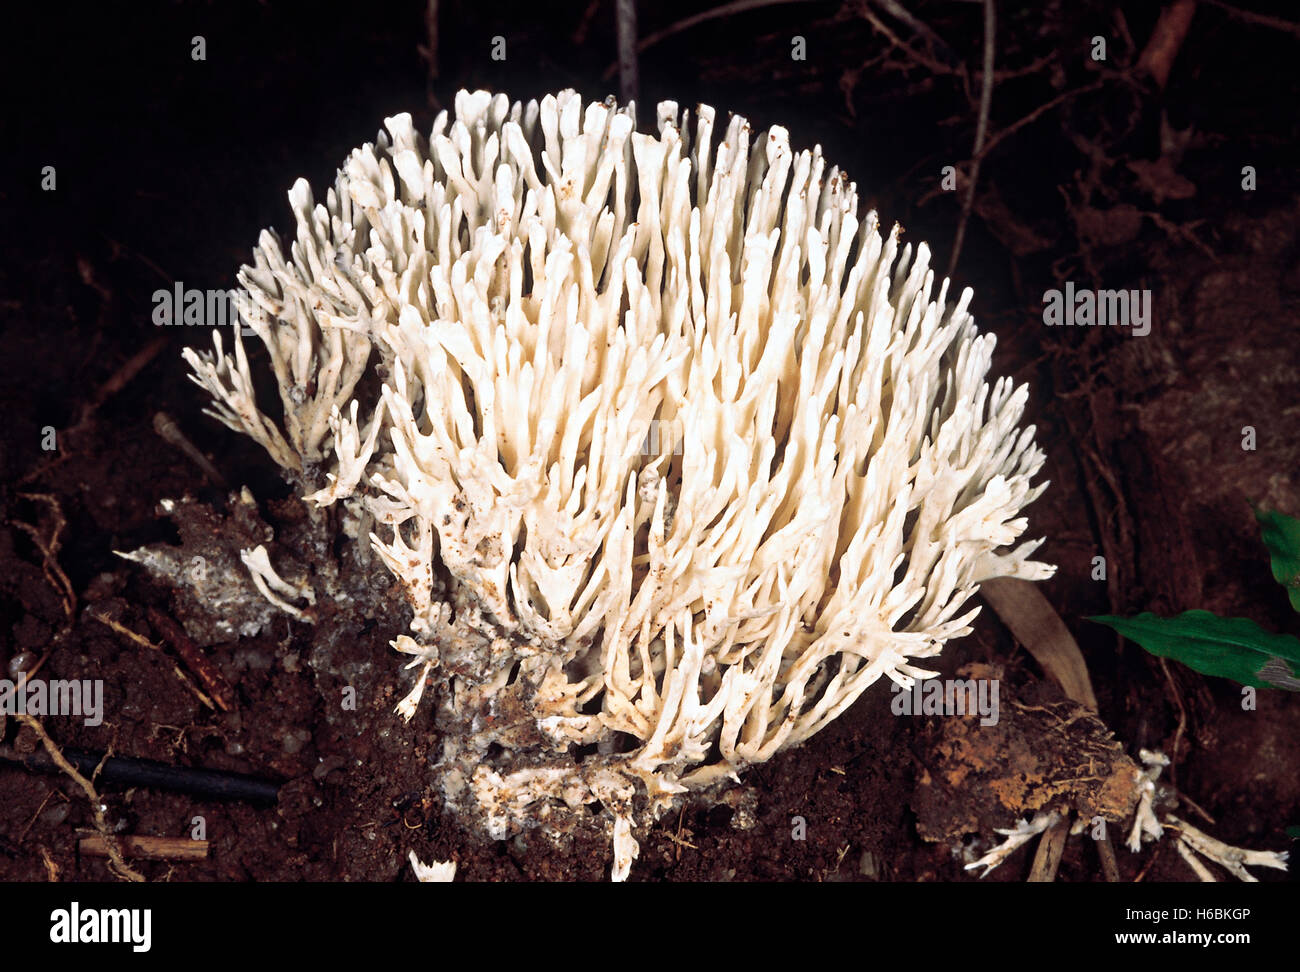 Coral fungus (white). Class: Homobasidiomycetes. Series: Hymenomycetes. Order: Aphyllophorales. Stock Photo